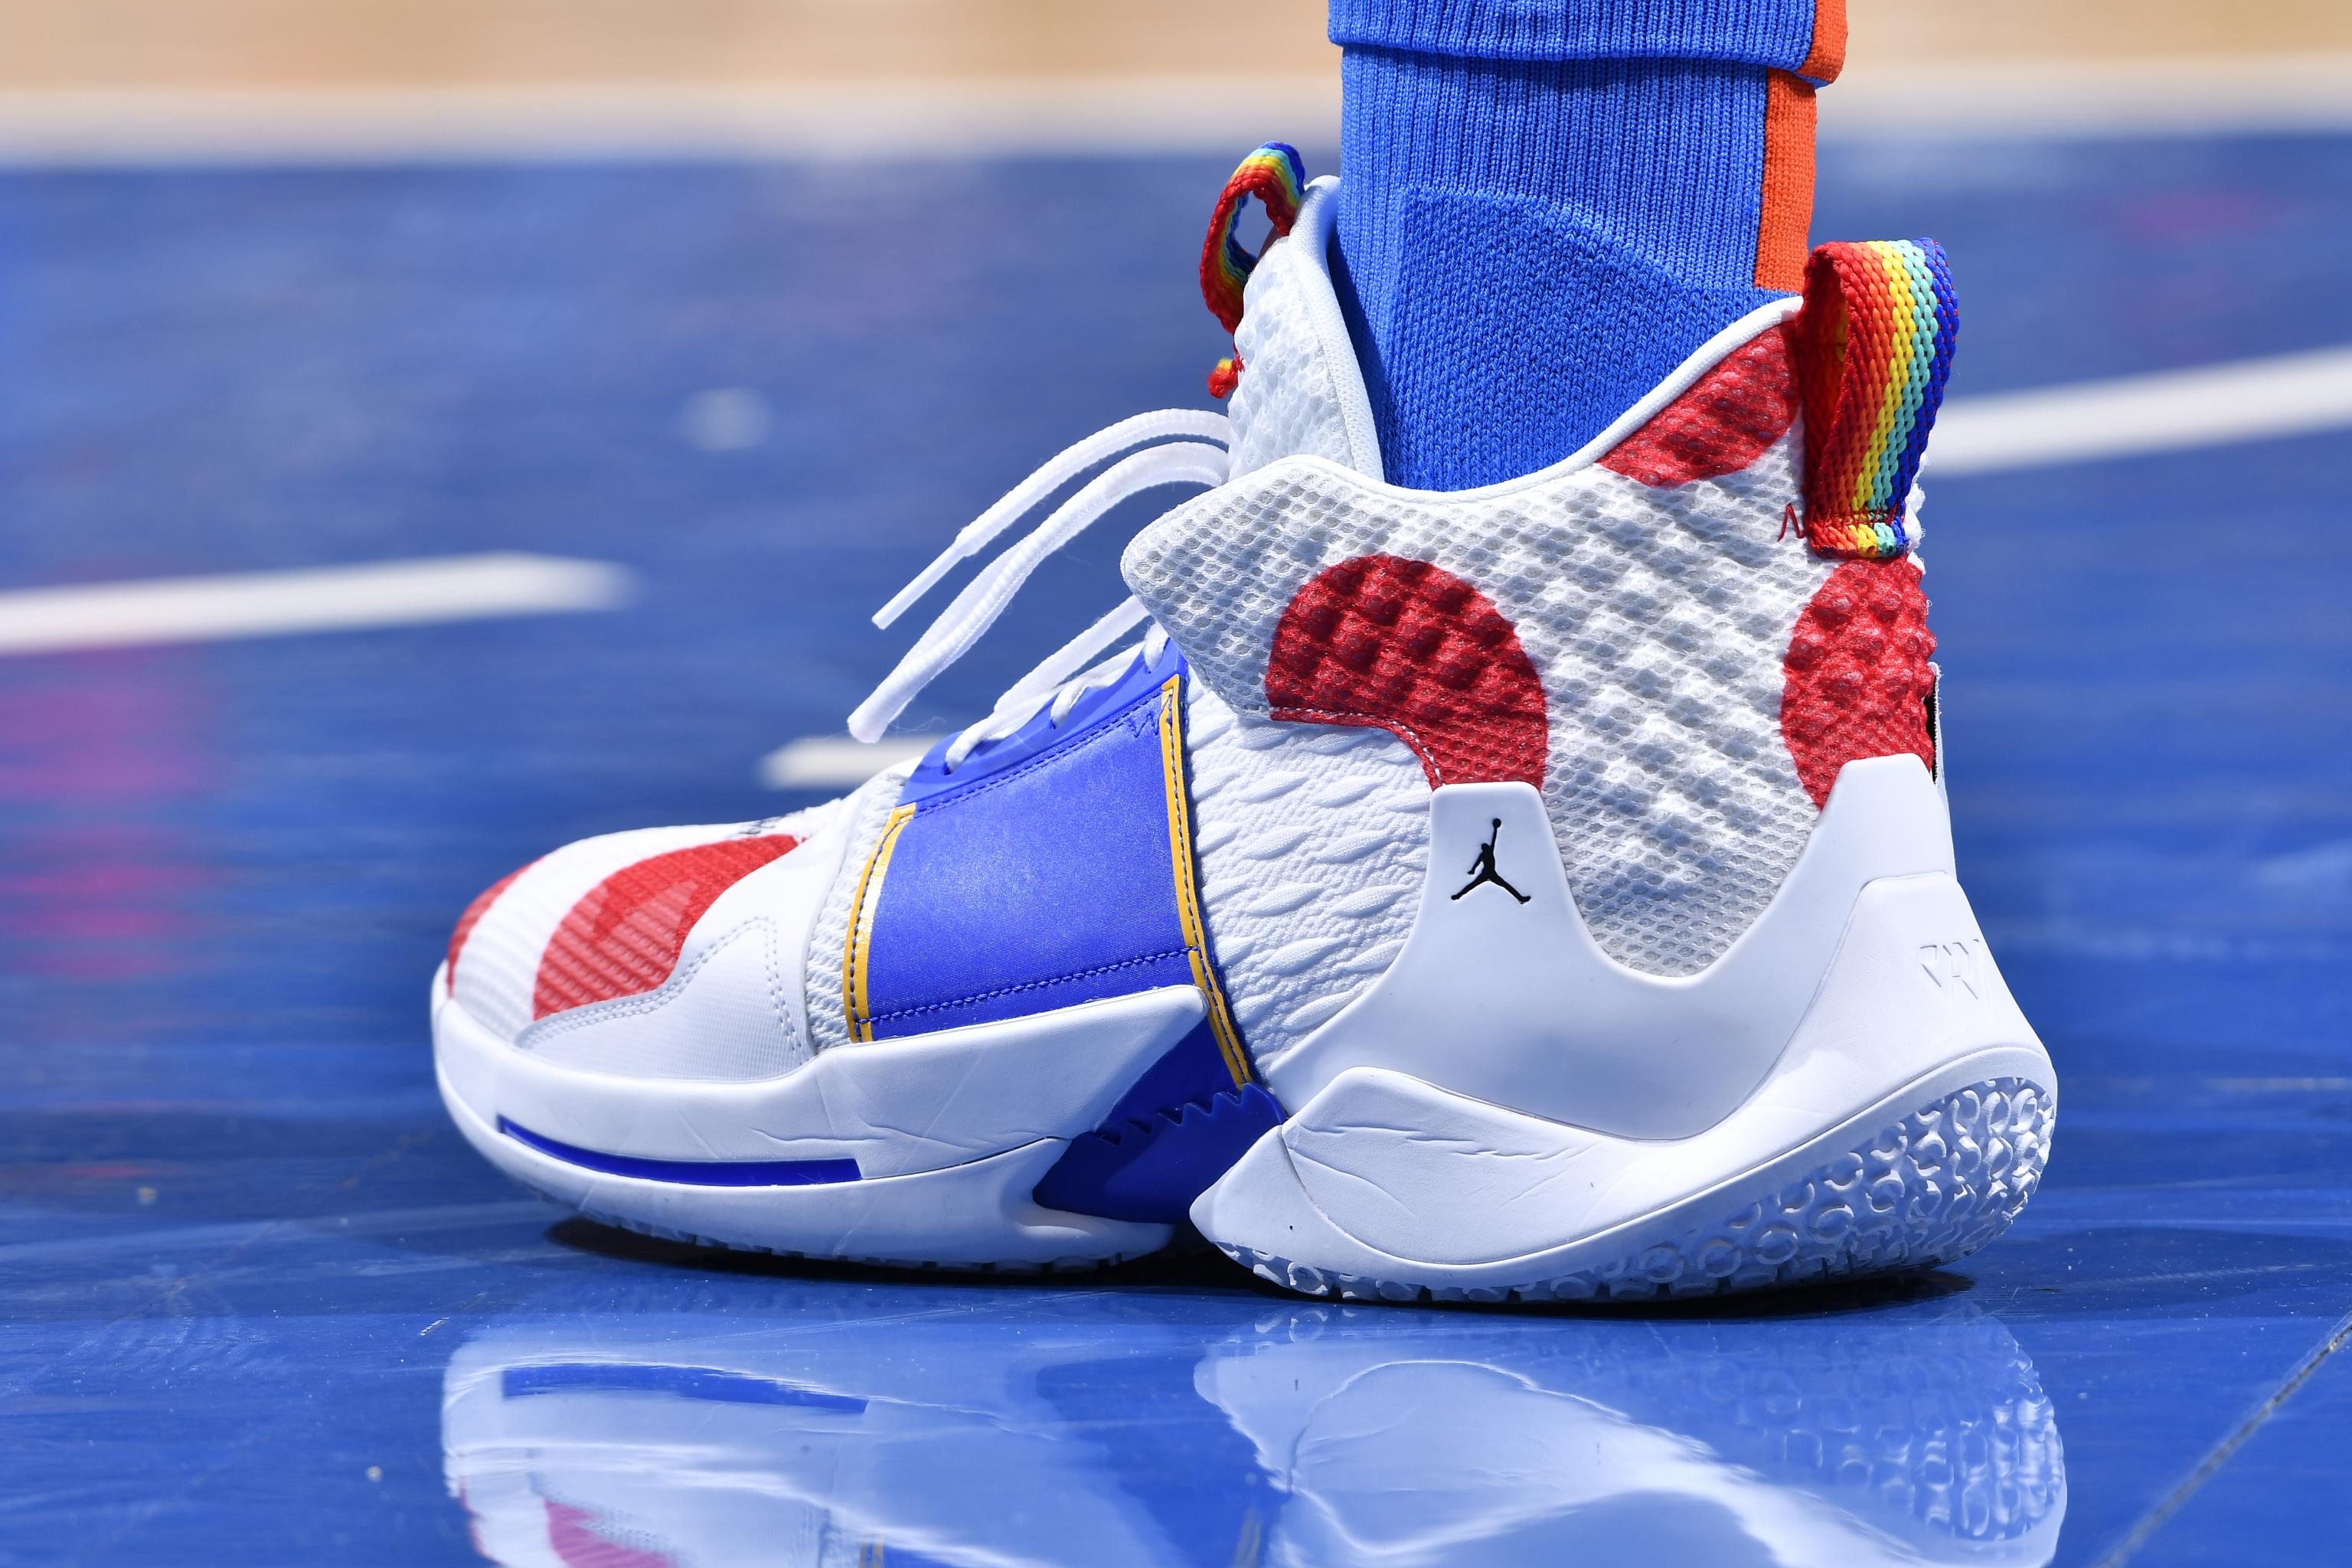 What Pros Wear: Luka Doncic's Nike Kyrie 4 Shoes - What Pros Wear